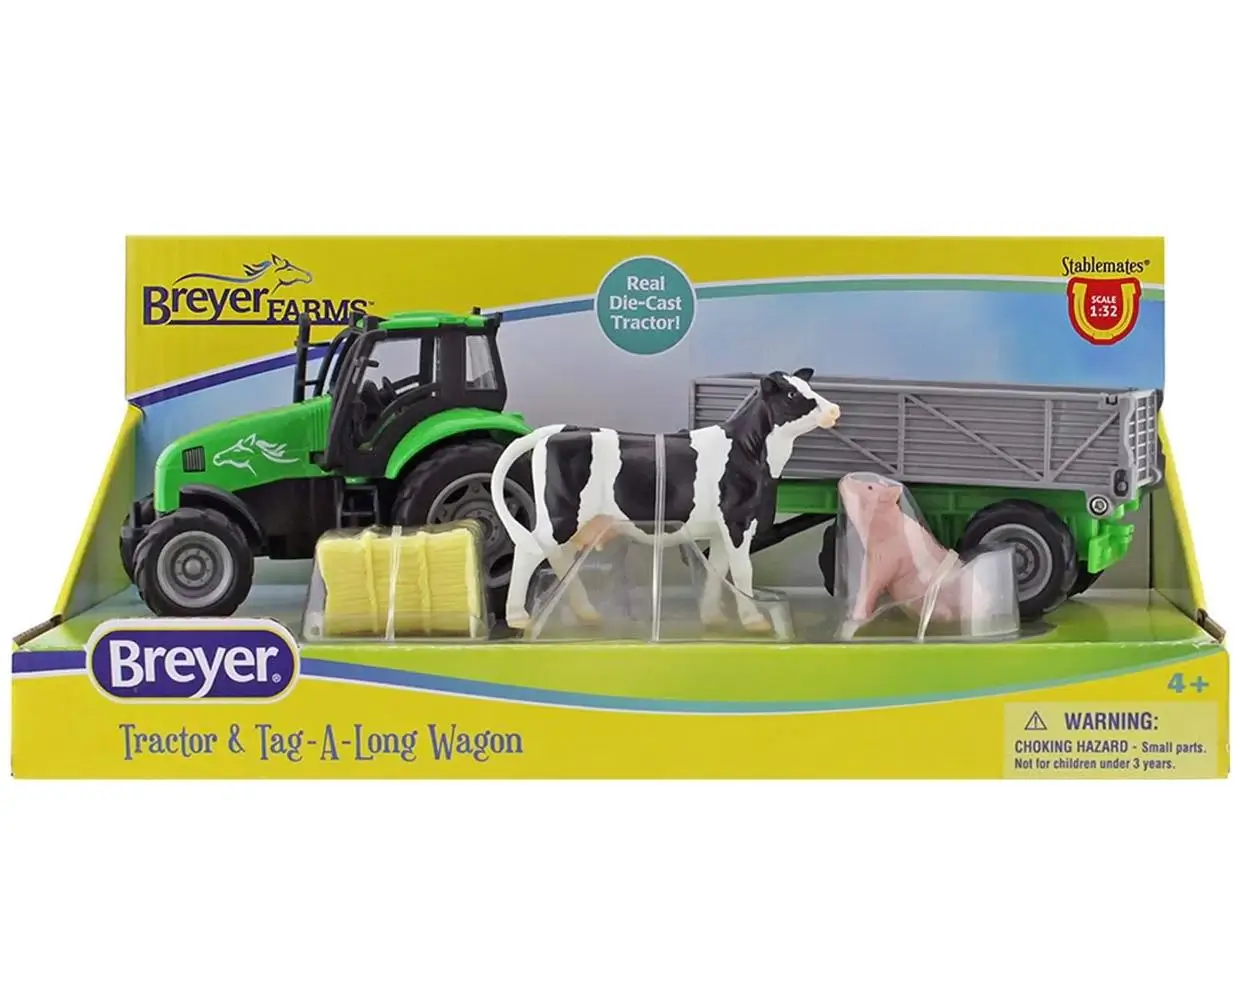 Breyer Farms™ Tractor & Tag-a-Long Wagon set in packaging